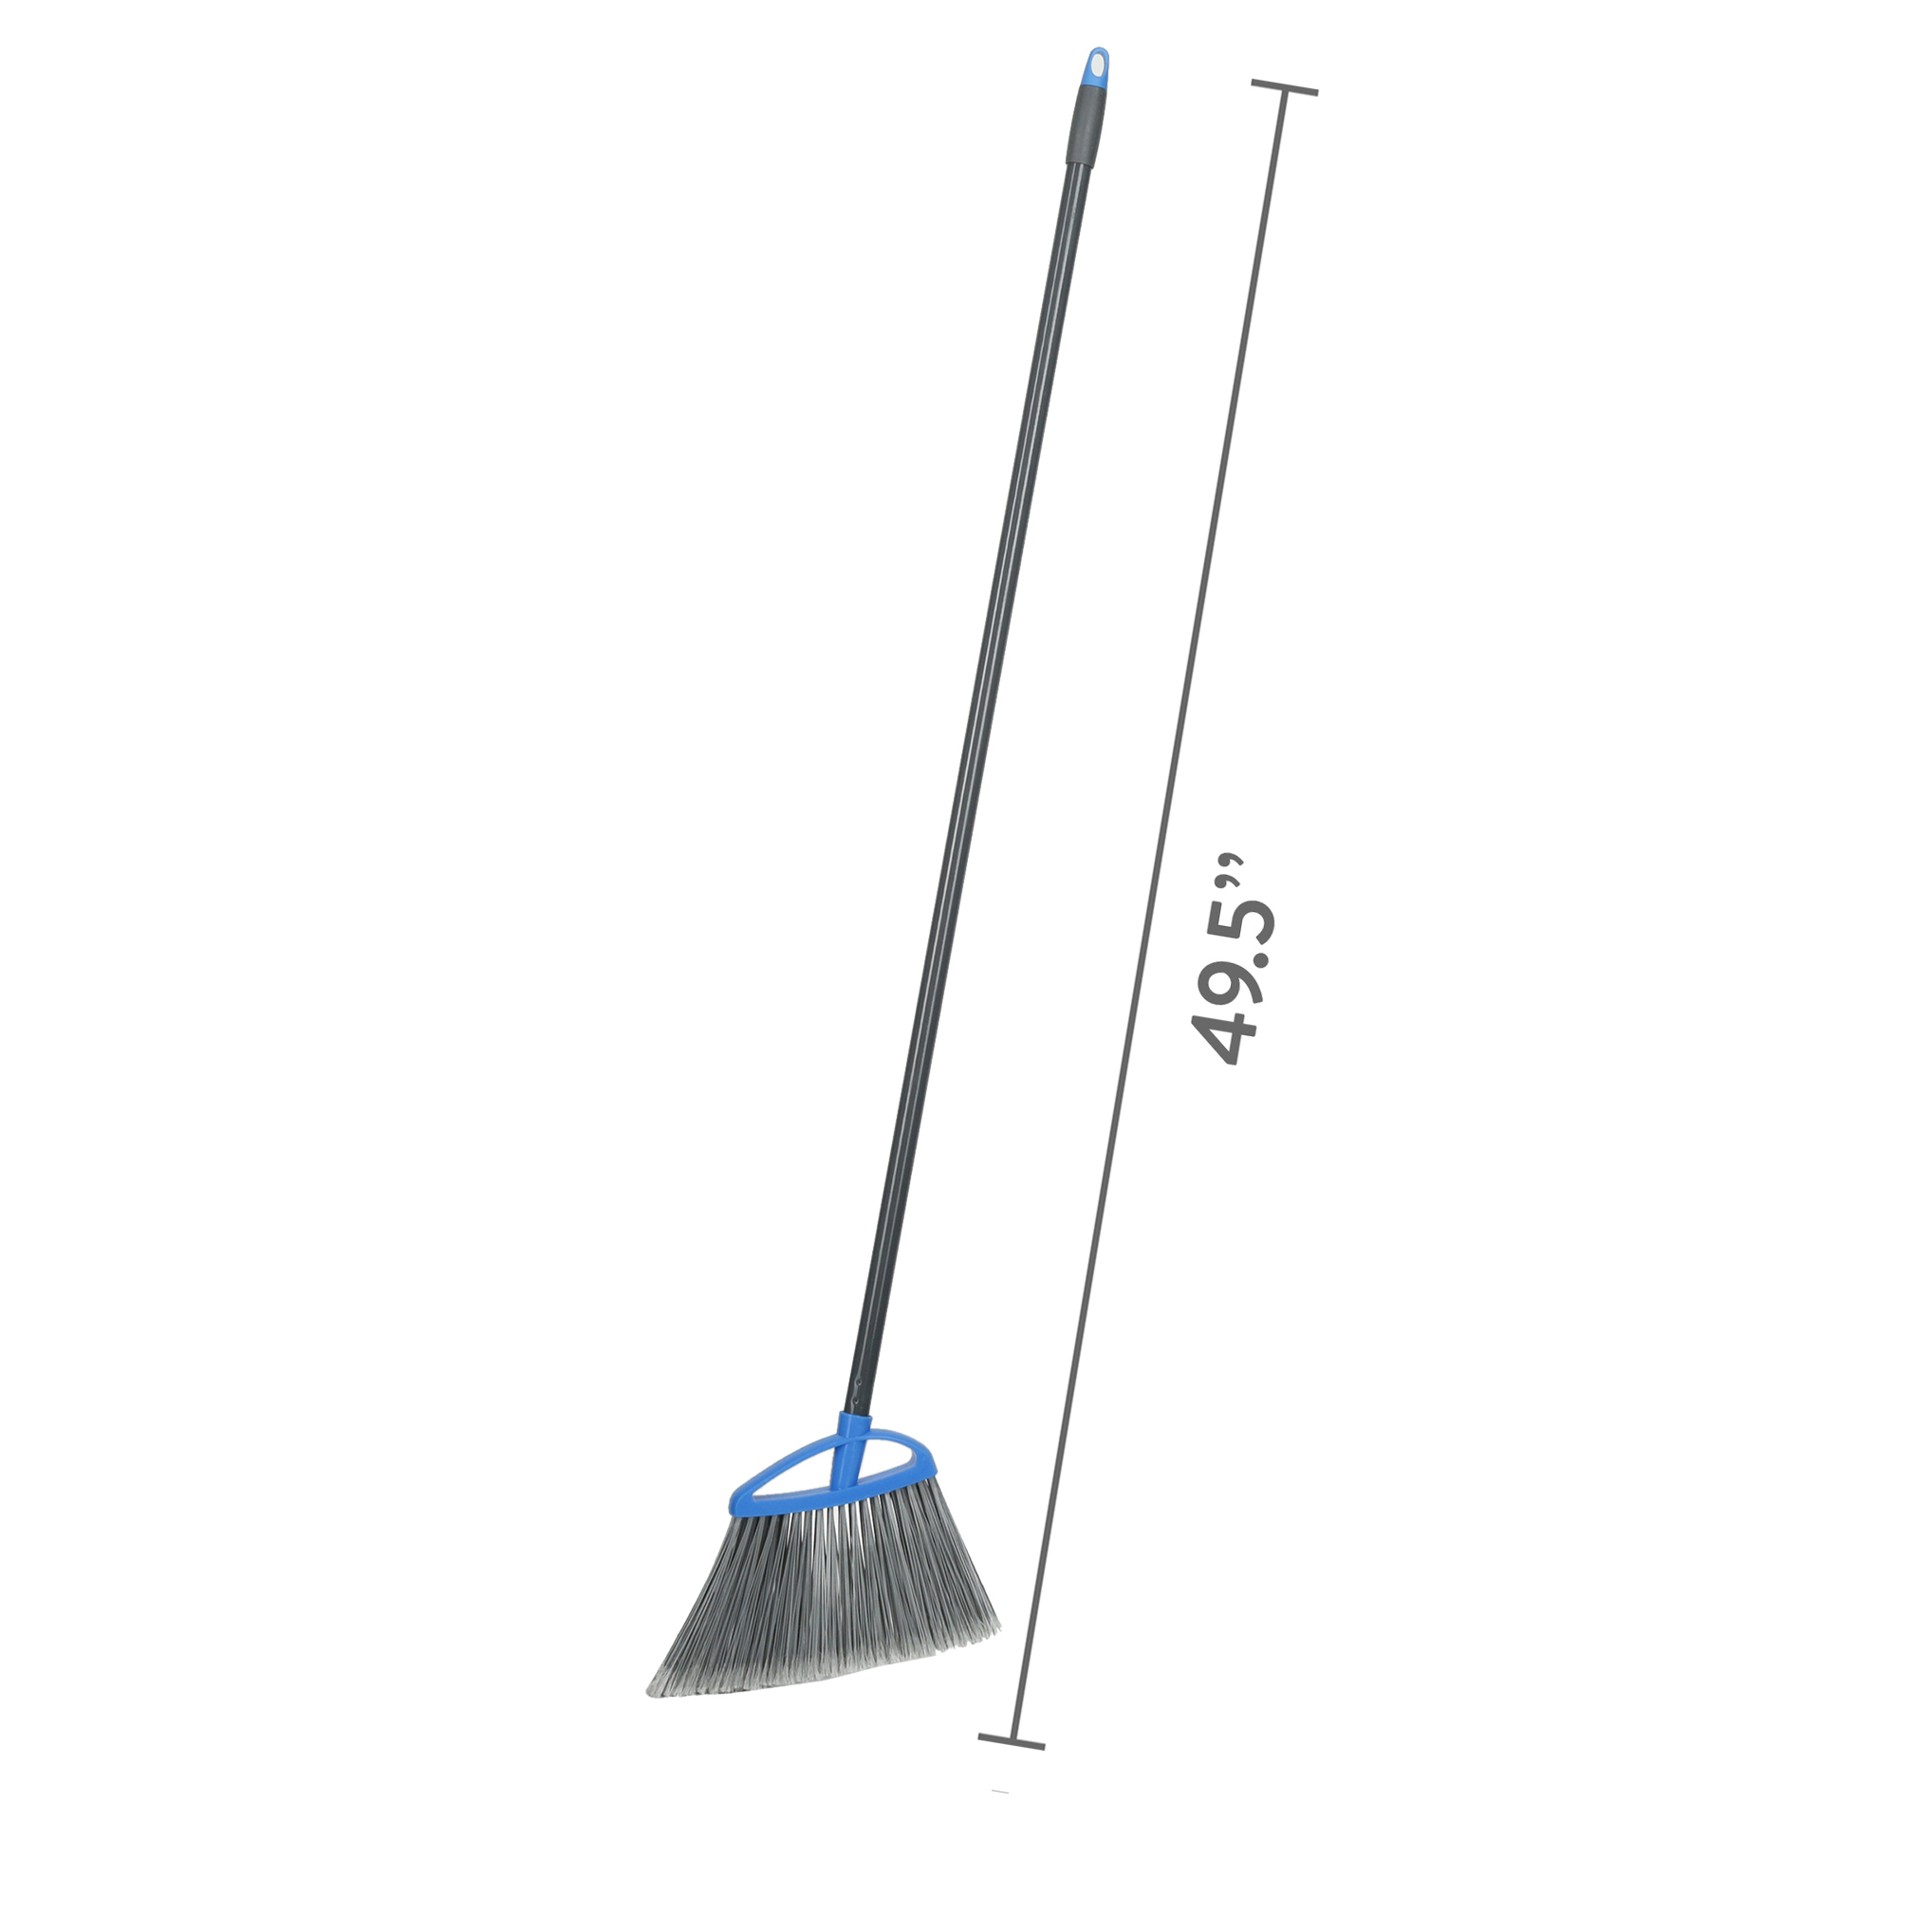 Great Value Basic Broom - image 4 of 9